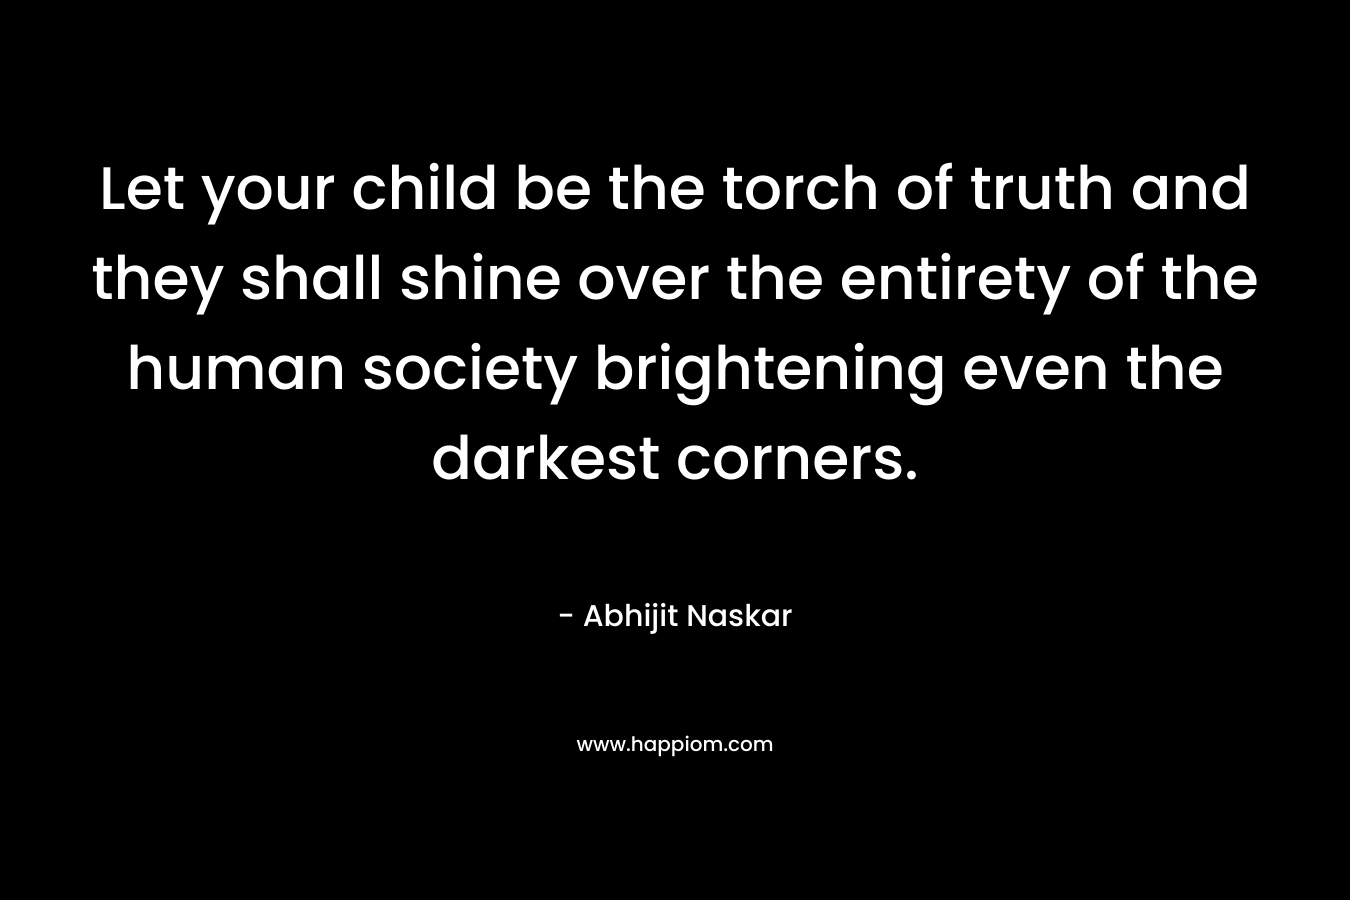 Let your child be the torch of truth and they shall shine over the entirety of the human society brightening even the darkest corners.